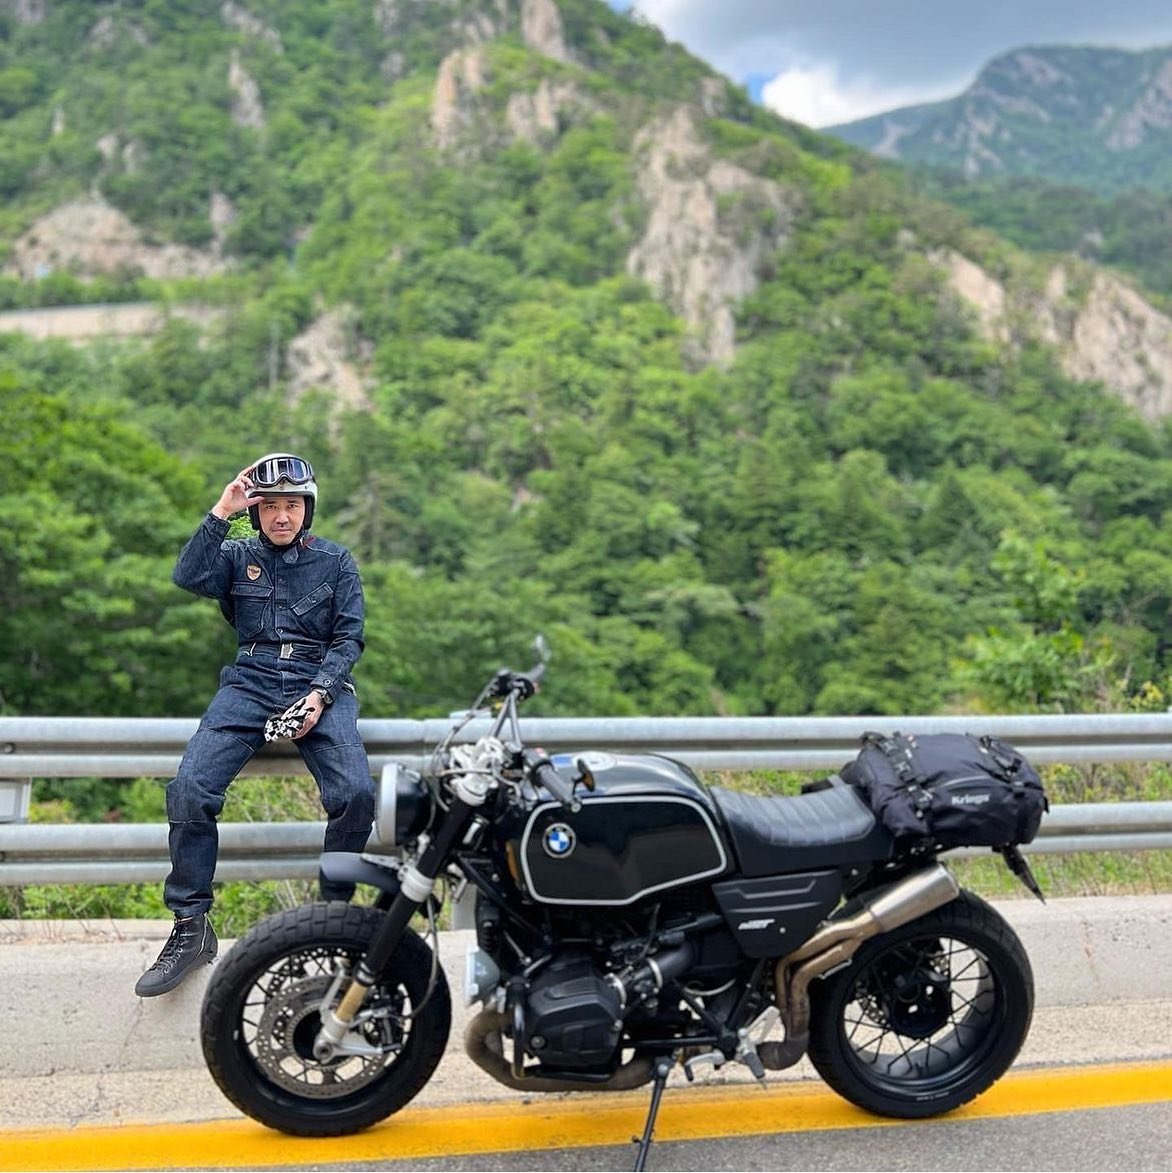 It doesn&rsquo;t matter what, where or how you ride, #ridekriega
Thanks to everyone who tags us is when they&rsquo;re using our luggage. We love to see how it is being used
1. @motorino_kr with US20-Drypack
2. @twintravel.adv &amp; Hydro 2 hydration 